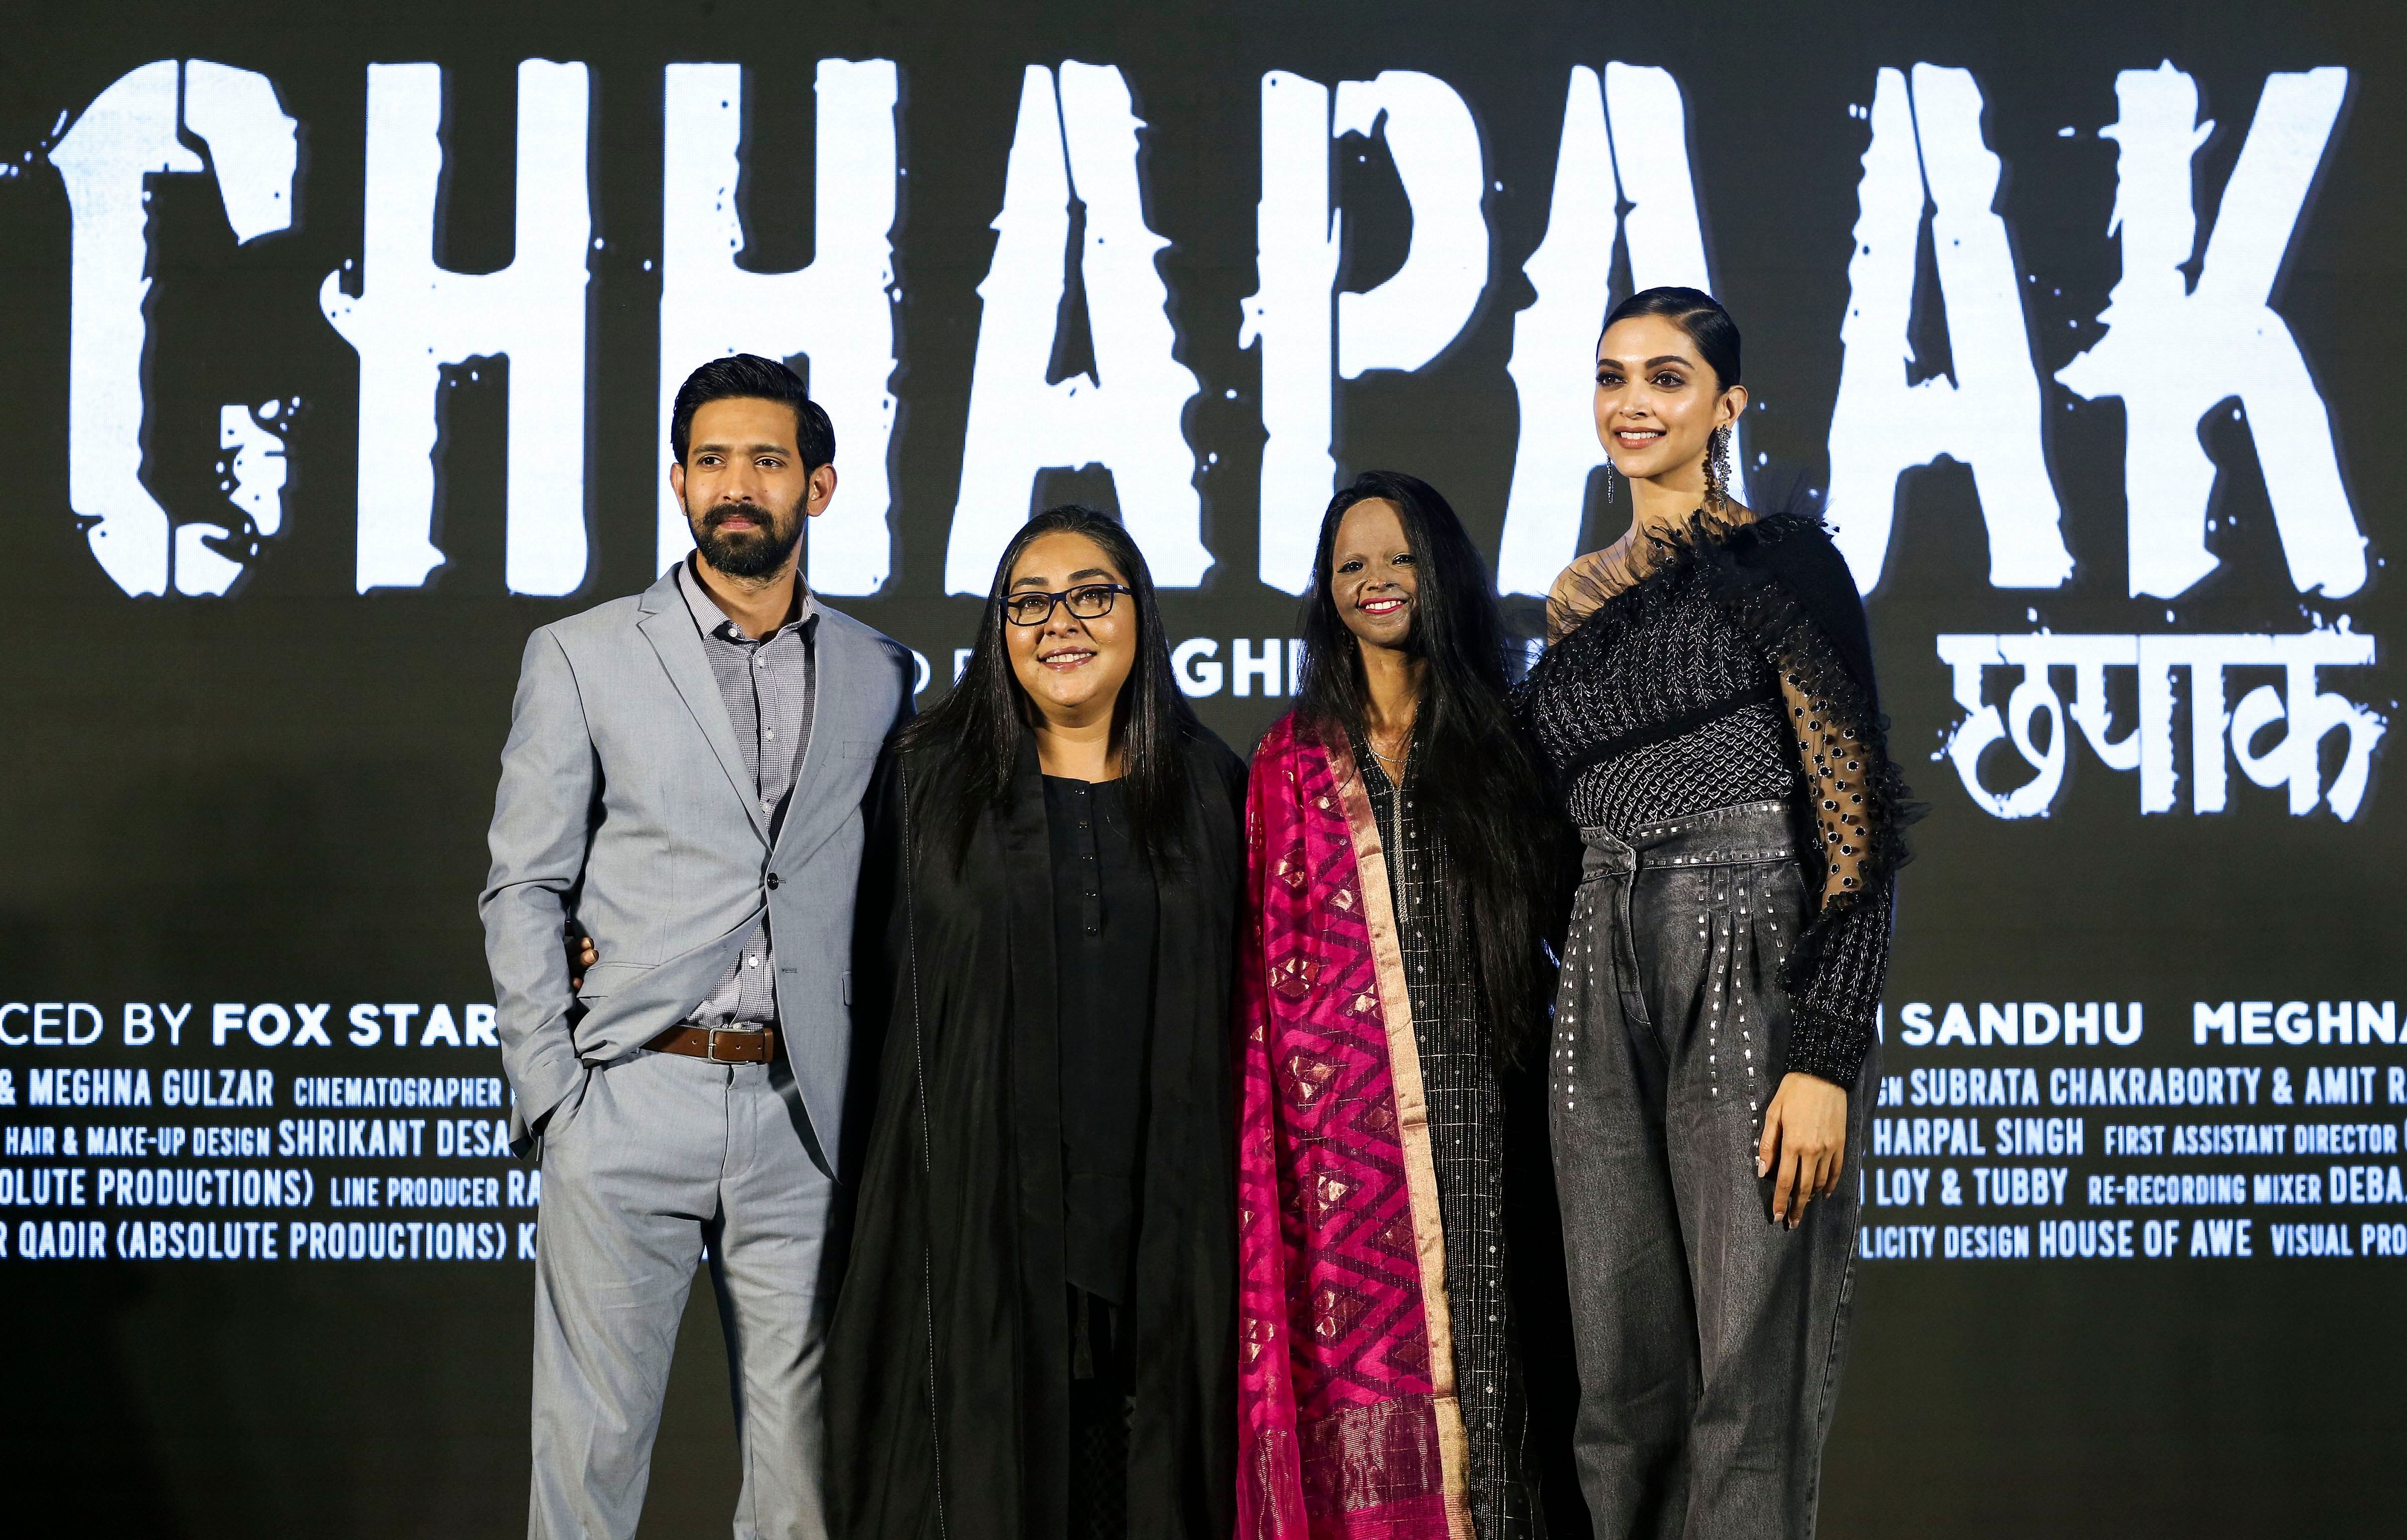 Director Meghna Gulzar, actor Vikram Massey, actress and producer Deepika Padukone and acid-attack survivor Laxmi Agarwal during the launch of title track of film ‘Chhapaak’, in Mumbai. (PTI Photo)